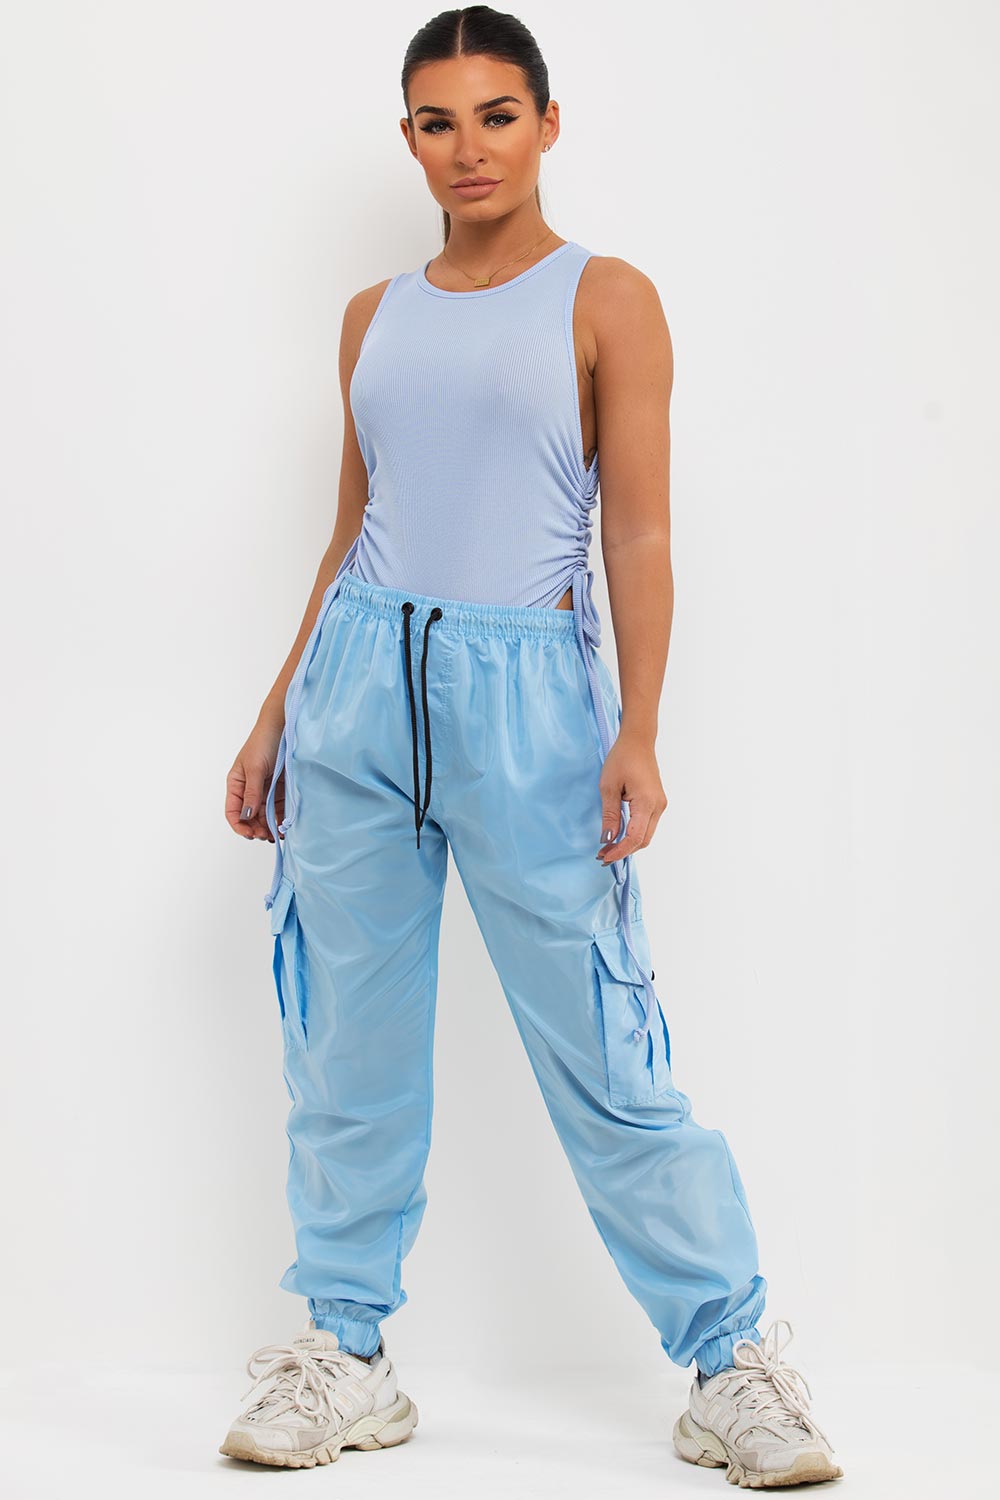 womens cargo pants with side pockets uk